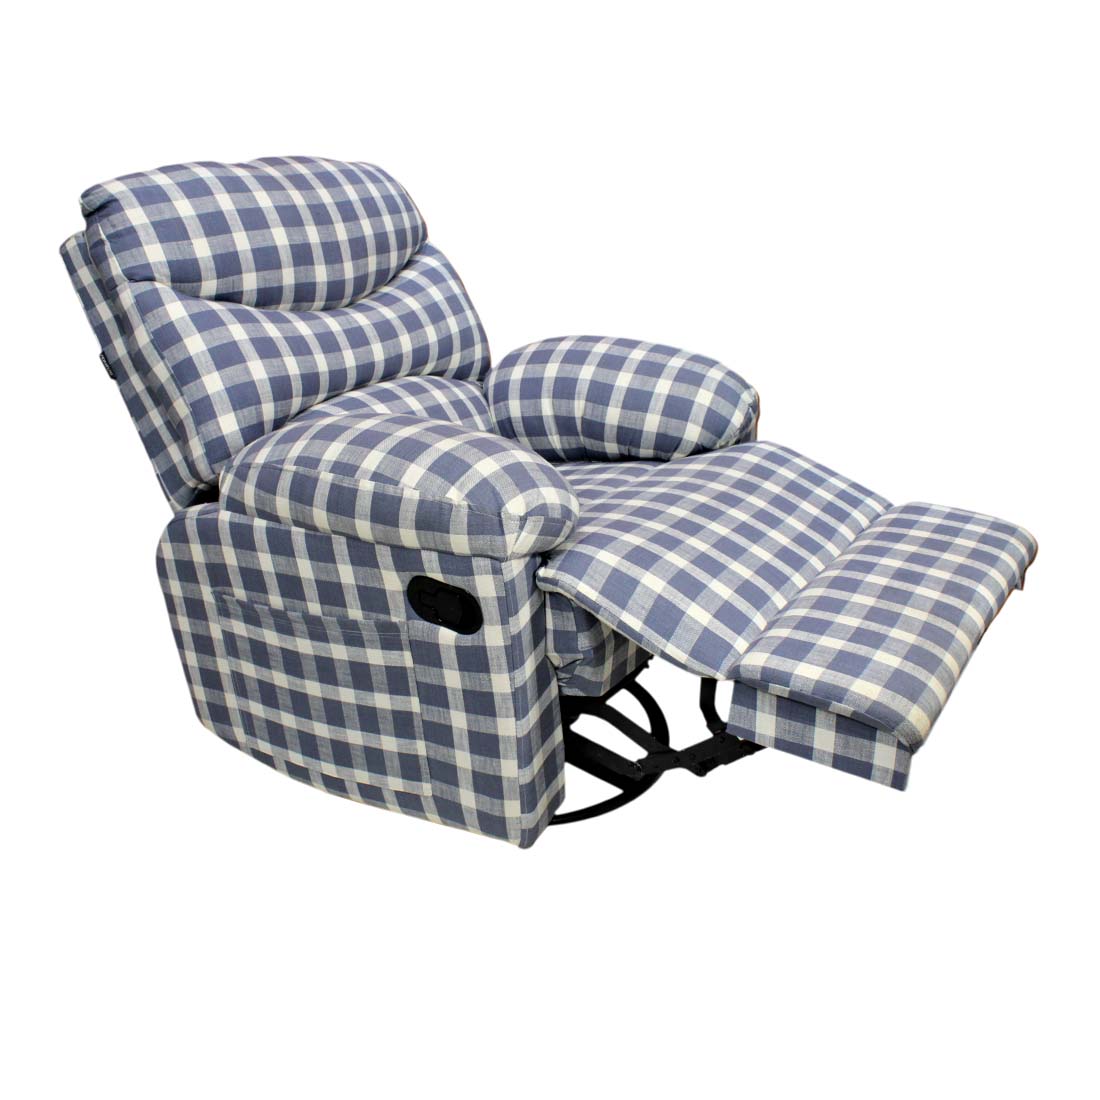 PRIMROSE Turner 2R Rocking Recliner With Cotton Fabric - Blue And White